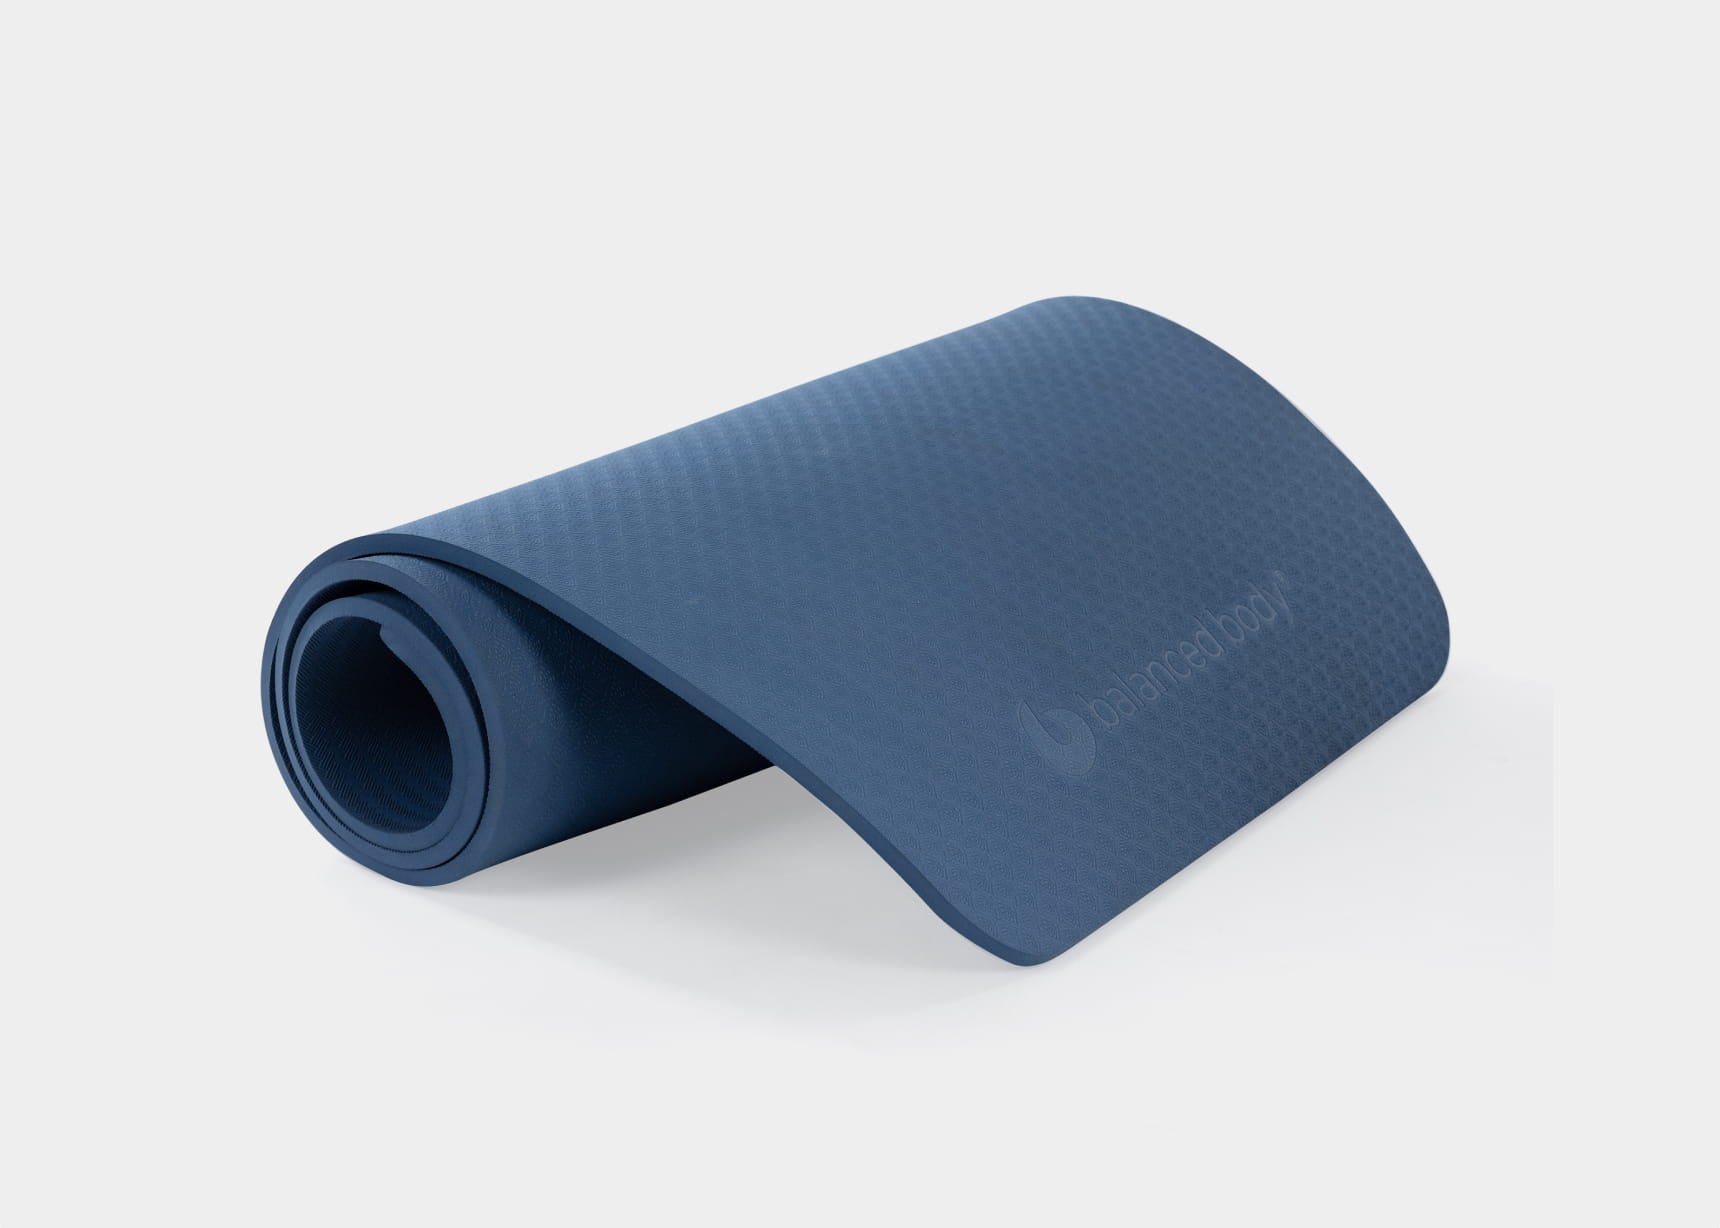 Breathe Pilates Studio - Check out our new Alo Yoga Warrior mats. These  non-slip mats have a natural rubber backing, giving you the perfect amount  of cushioning. . . Color: Smoky Quartz